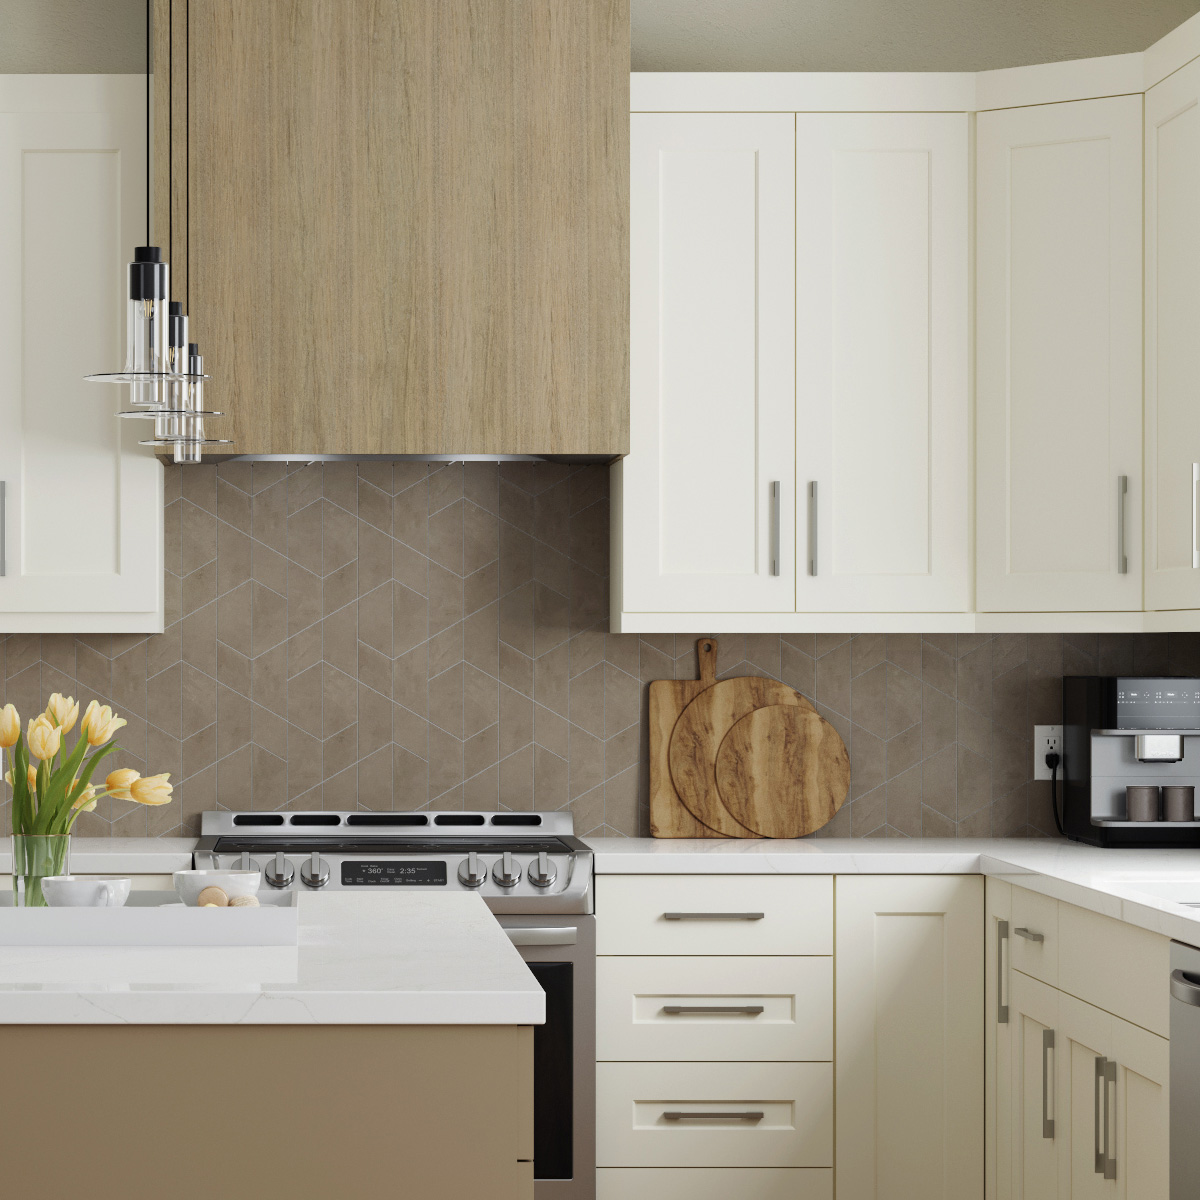 Millennia Lynden Cabinets with Natural Grain and Cream Finishes | Canyon Creek Cabinet Company